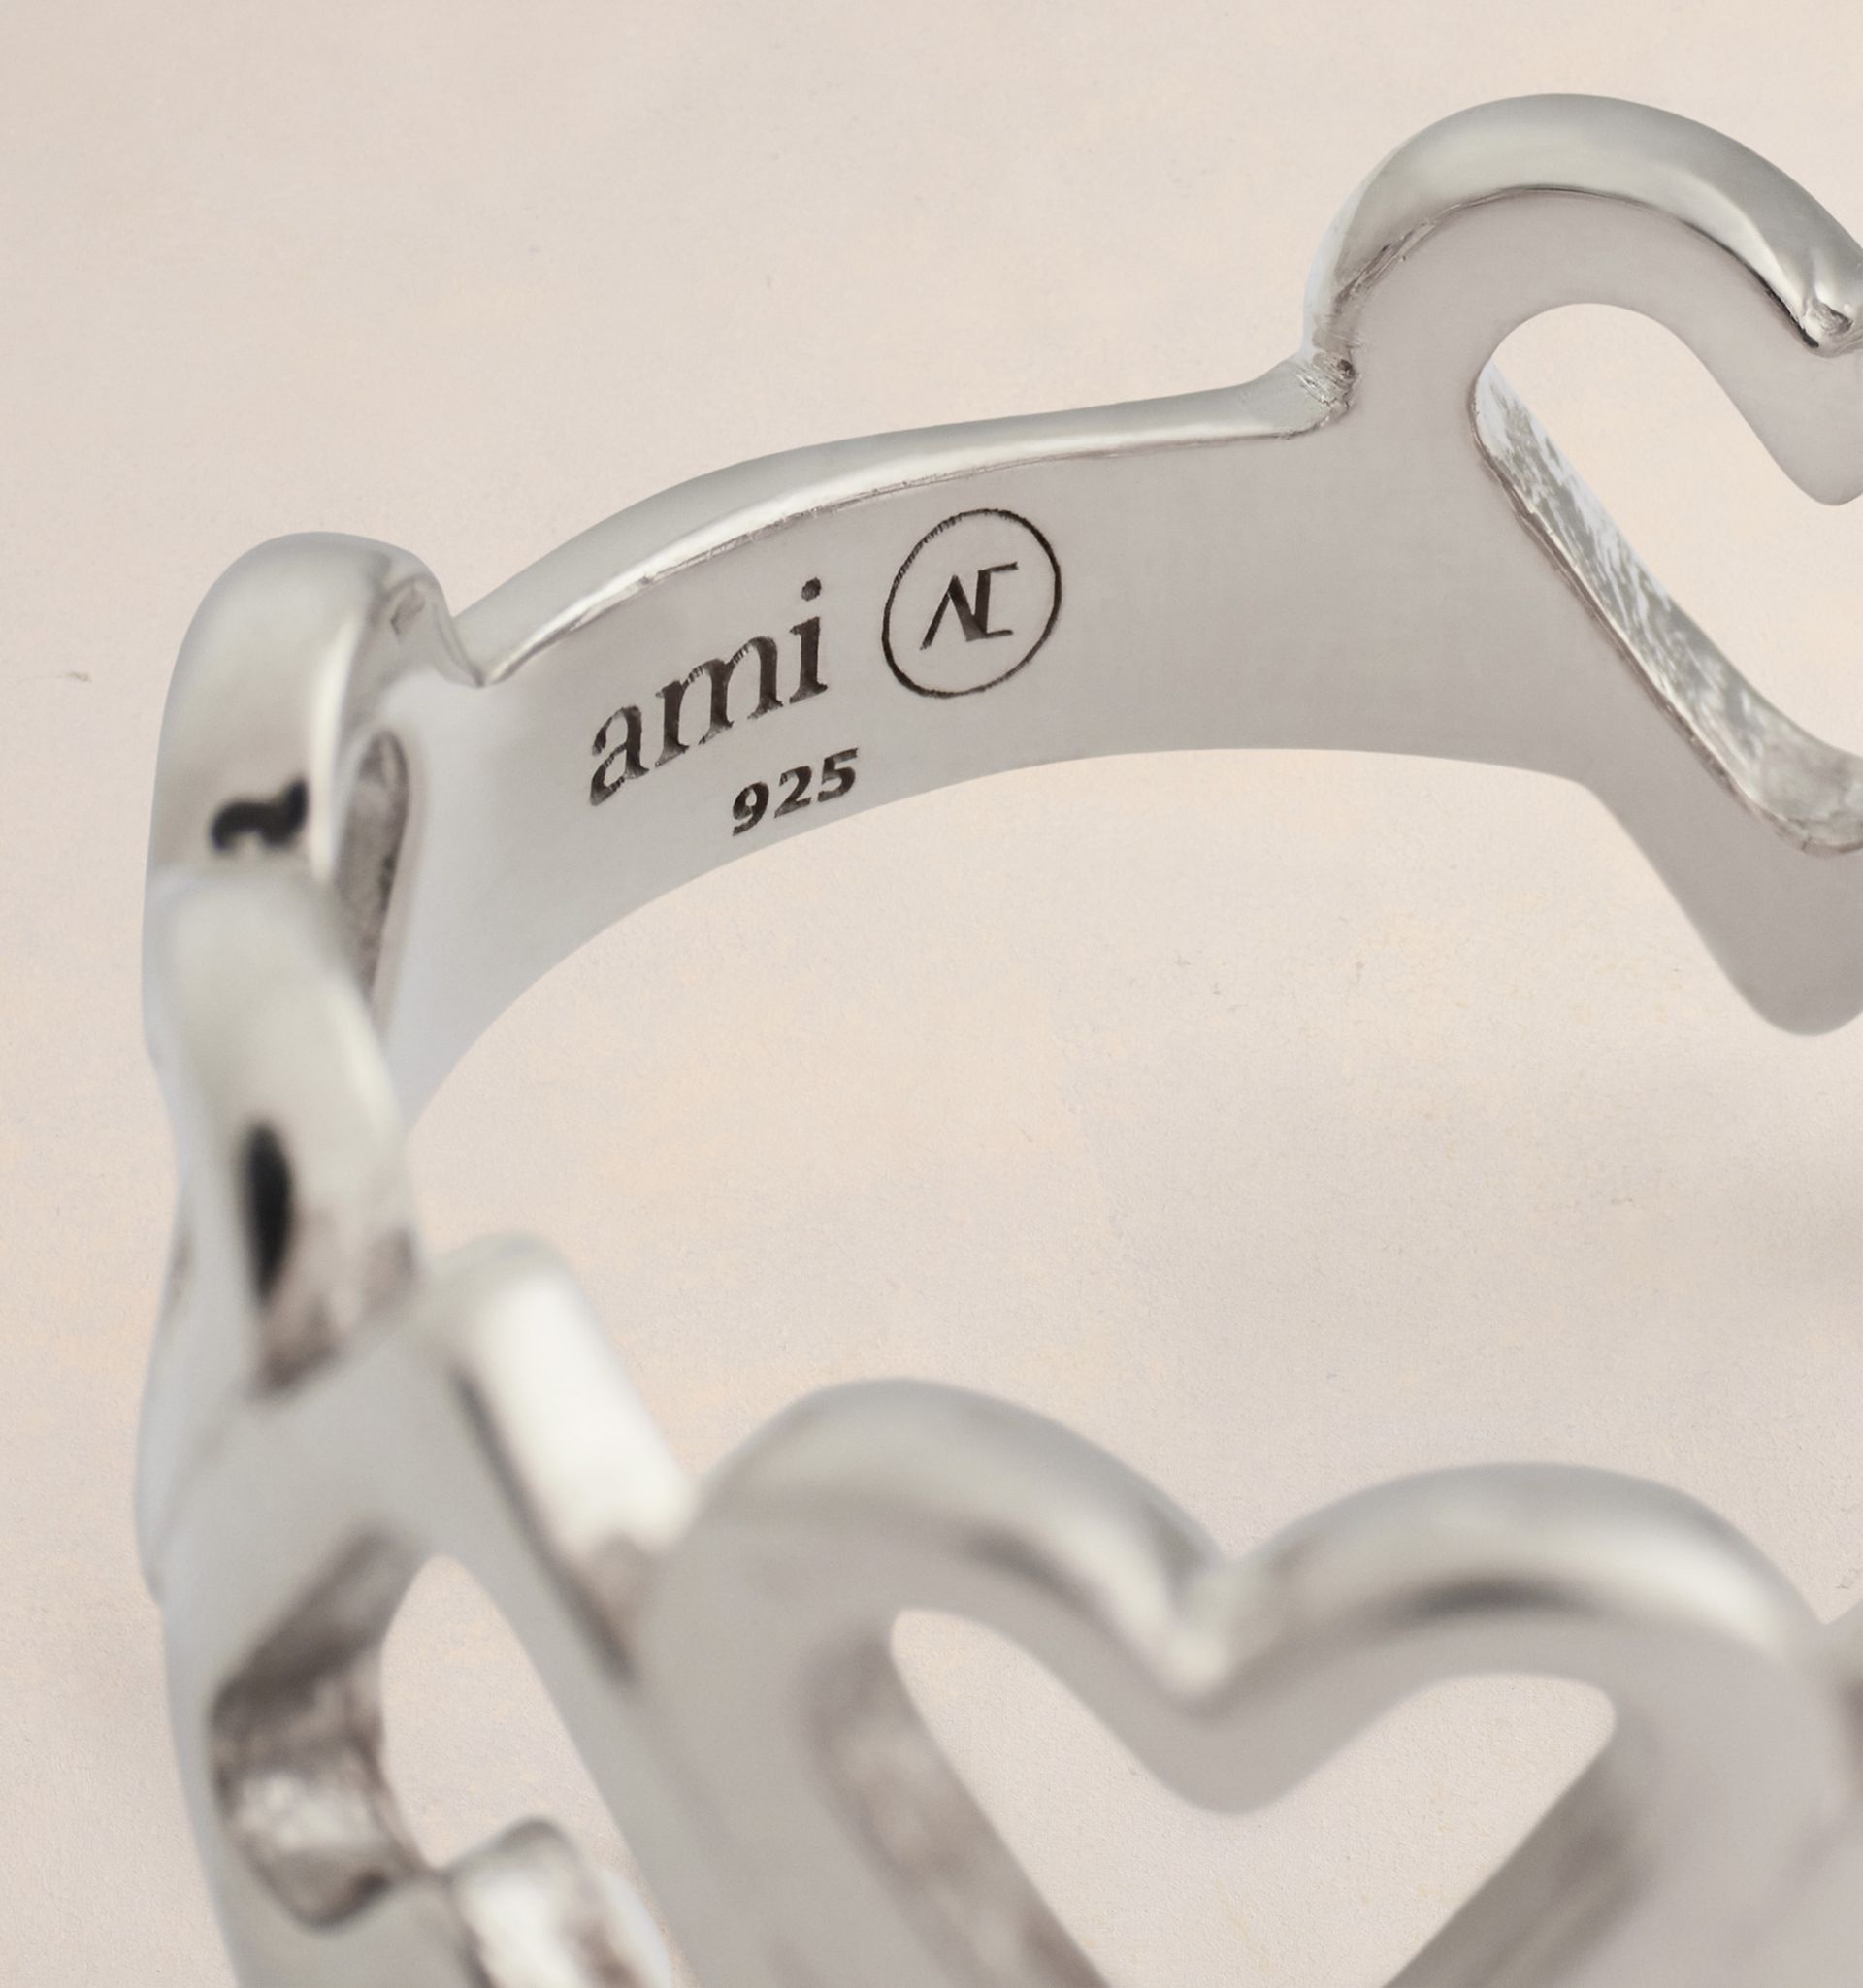 Upside Down Hearts Ring - 4